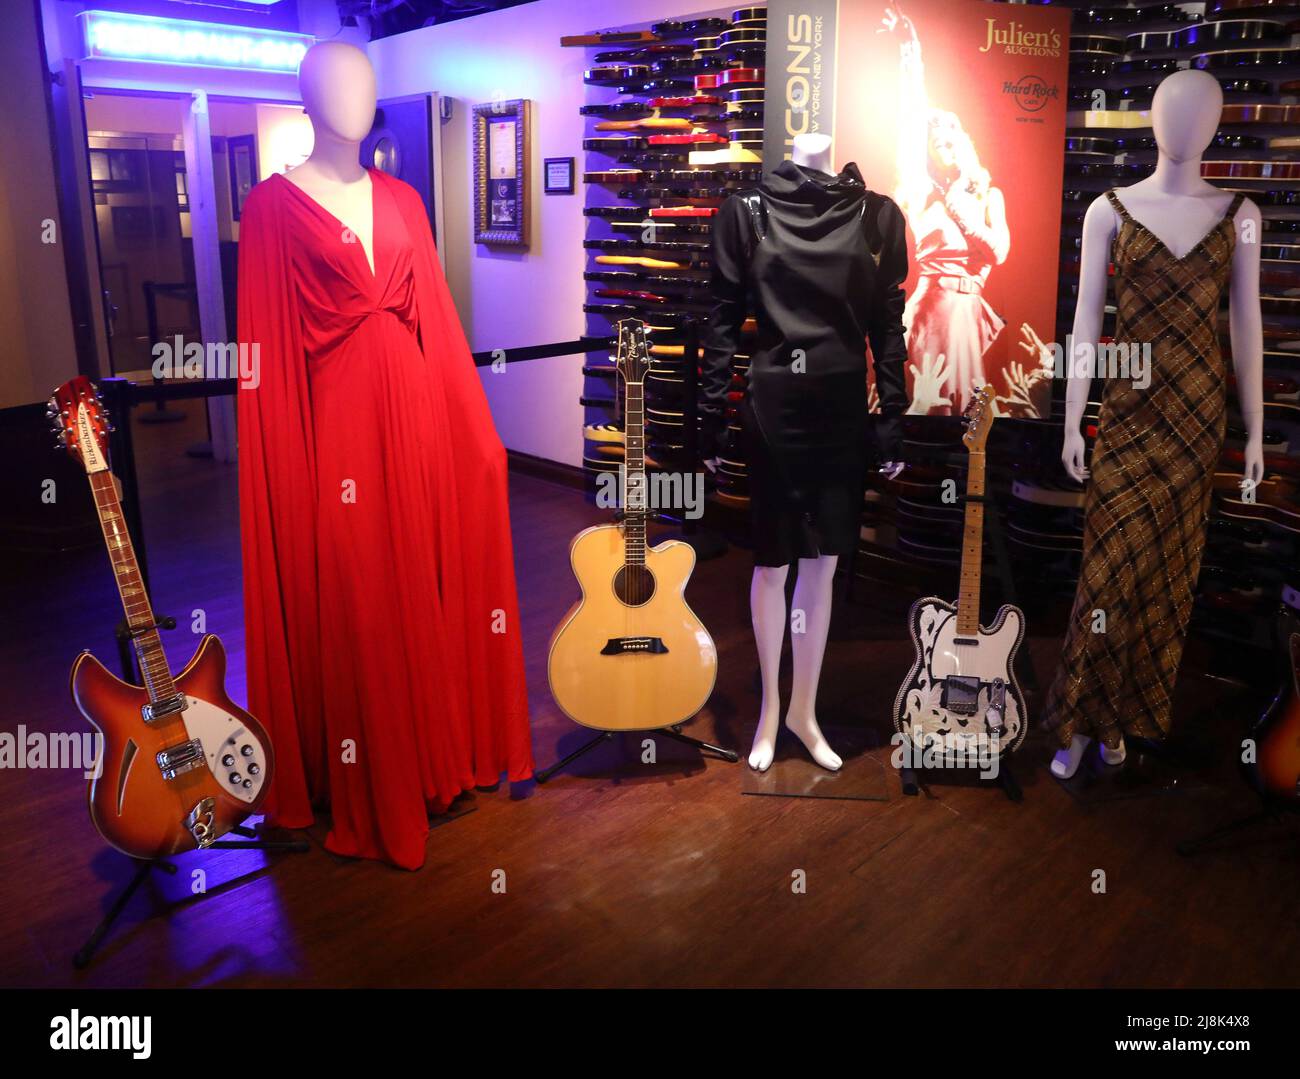 New York, New York, USA. 16th May, 2022. A view of (L-R) 1984 12-String Rickenbacker 360/F12-FG-WB-B electric guitar signed and inscribed by Tom Petty, custom red gown by Kesha to the 2018 Grammy Awards Sony Music after party, Takamine acoustic/electric guitar played by Bruce Springsteen during the Born in the U.S.A. tour, black tunic with a Demobaza label worn by Janet Jackson during the Glastonbury Festival in 2019, Waylon Jenning's custom Fender Telecaster and Bob Mackie gown worn by Cher during the TV show ''˜The Sonny and Cher Comedy Hour' seen on display at the press preview for Juli Stock Photo